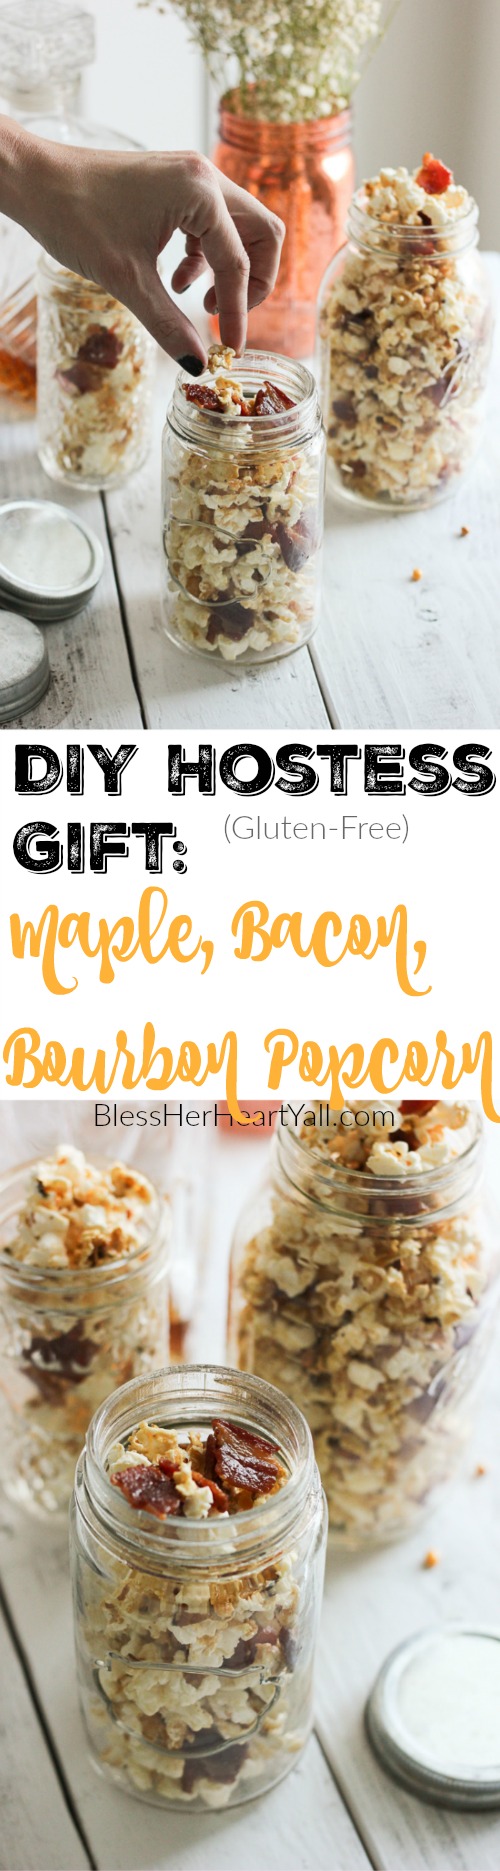 This maple, bacon, bourbon popcorn hits all the right spots, with it's freshly popped popcorn, sprinkled with thick-cut applewood bacon, and then drizzled with butter, salt, maple syrup, and of course bourbon! It's a quick, easy, and inexpensive DIY gift for friends, co-workers, and host/hostess's this holiday season! www.blessherheartyall.com